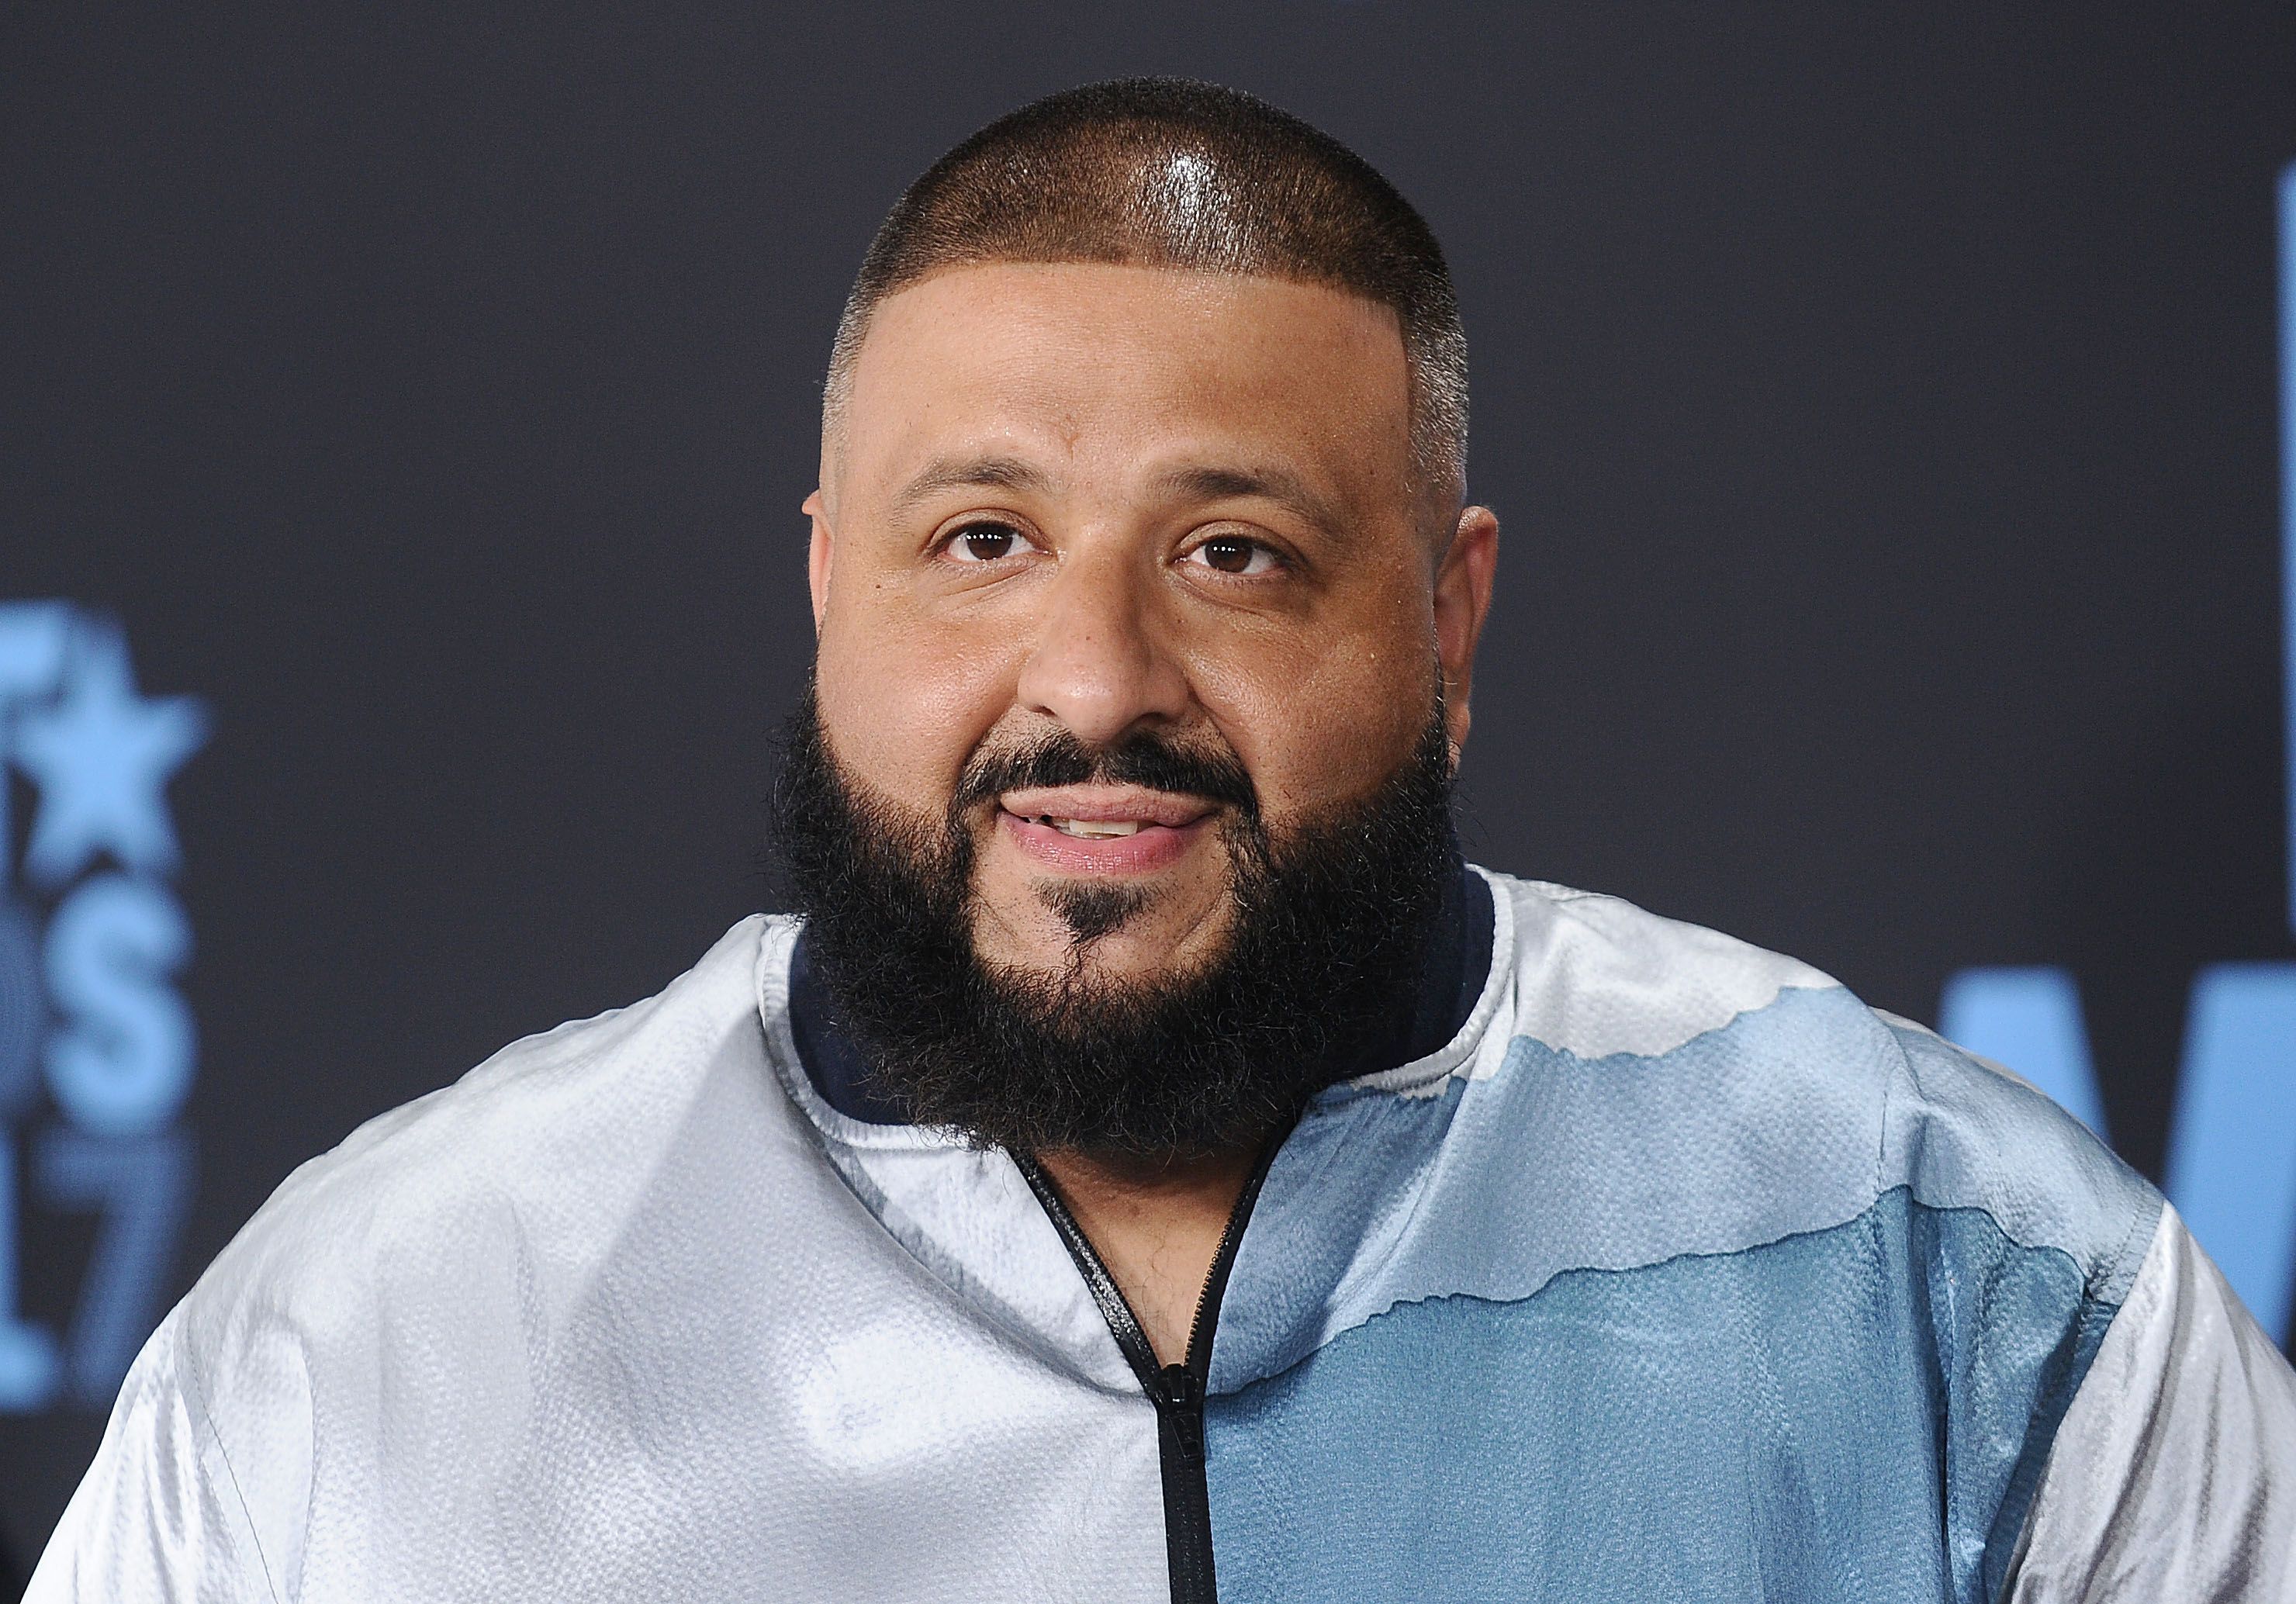 DJ Khaled attending the BET Awards in Los Angeles on June 25, 2017. | Photo: Getty Images